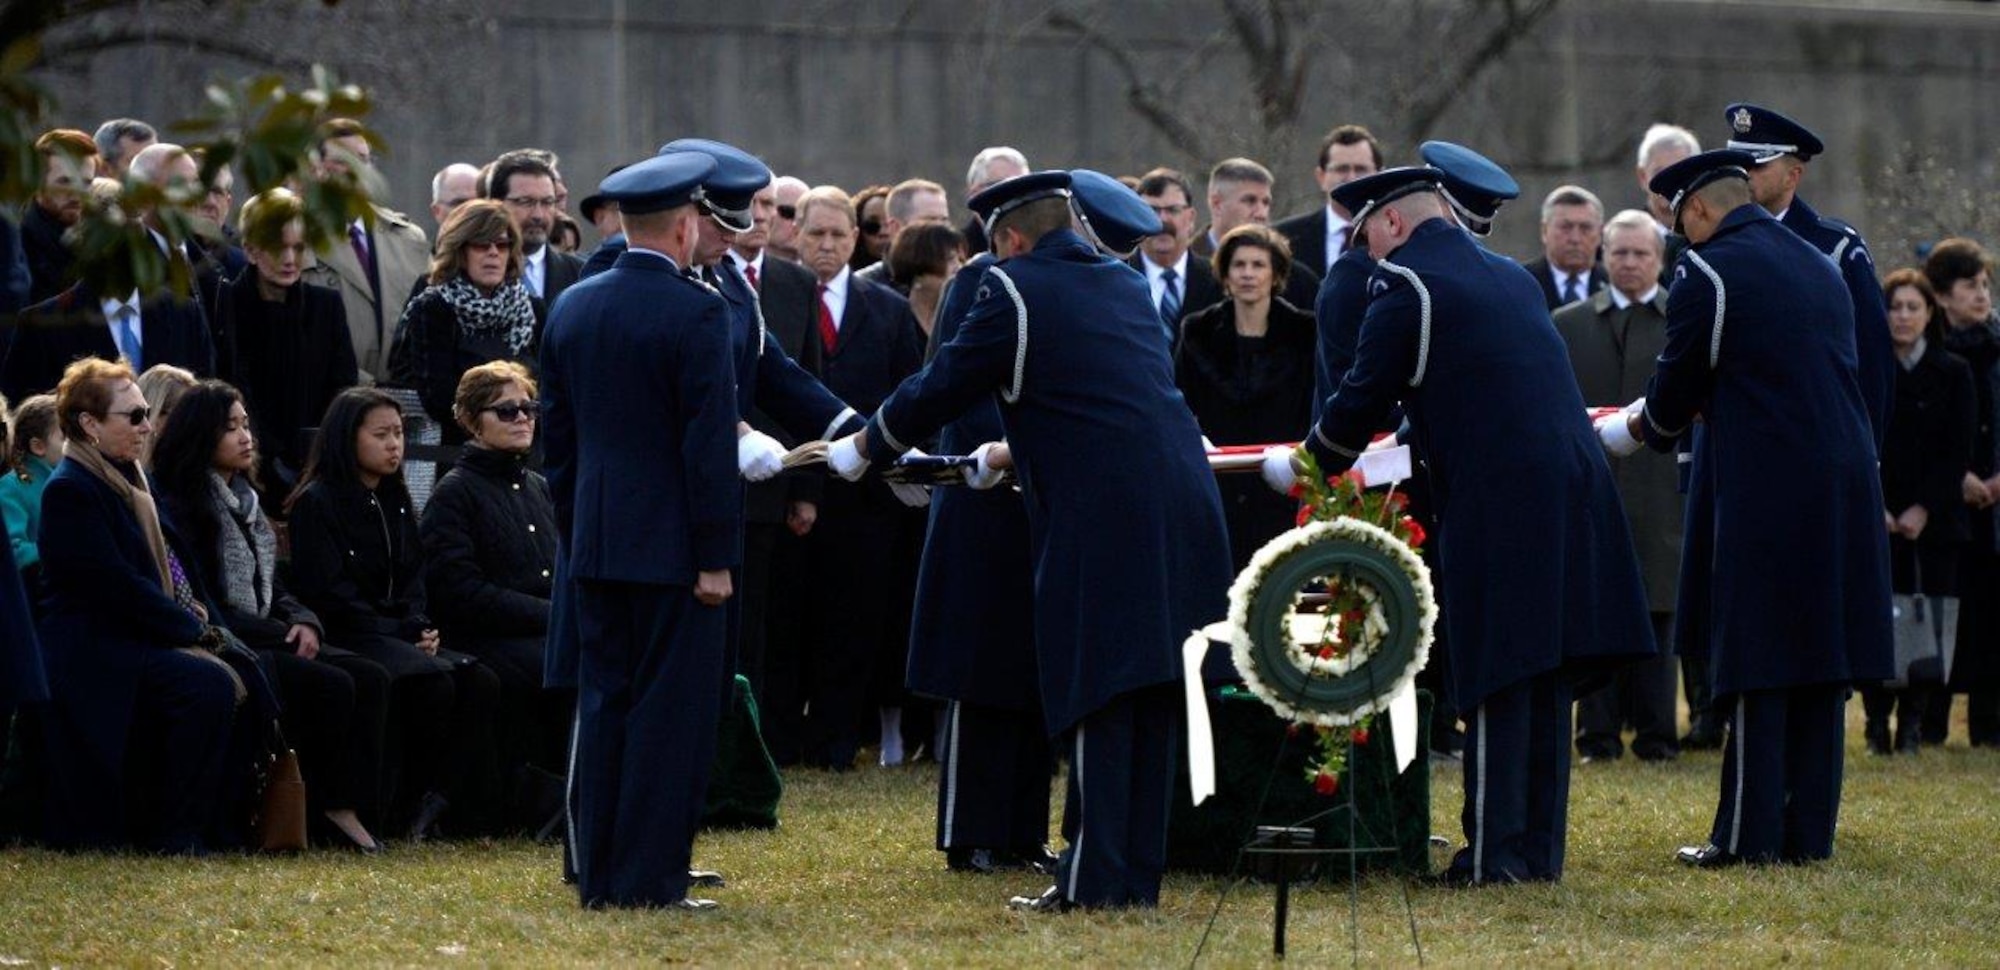 Ceremonial Guardsmen fold the American flag during the full honors funeral ceremony for retired Col. Leo Thorsness at Arlington National Cemetery, Arlington, Va., Feb. 14, 2018. Thorsness was a Vietnam prisoner of war and Medal of Honor recipient who served 23 years in the Air Force. (U.S. Air Force photo by Staff Sgt. Rusty Frank)